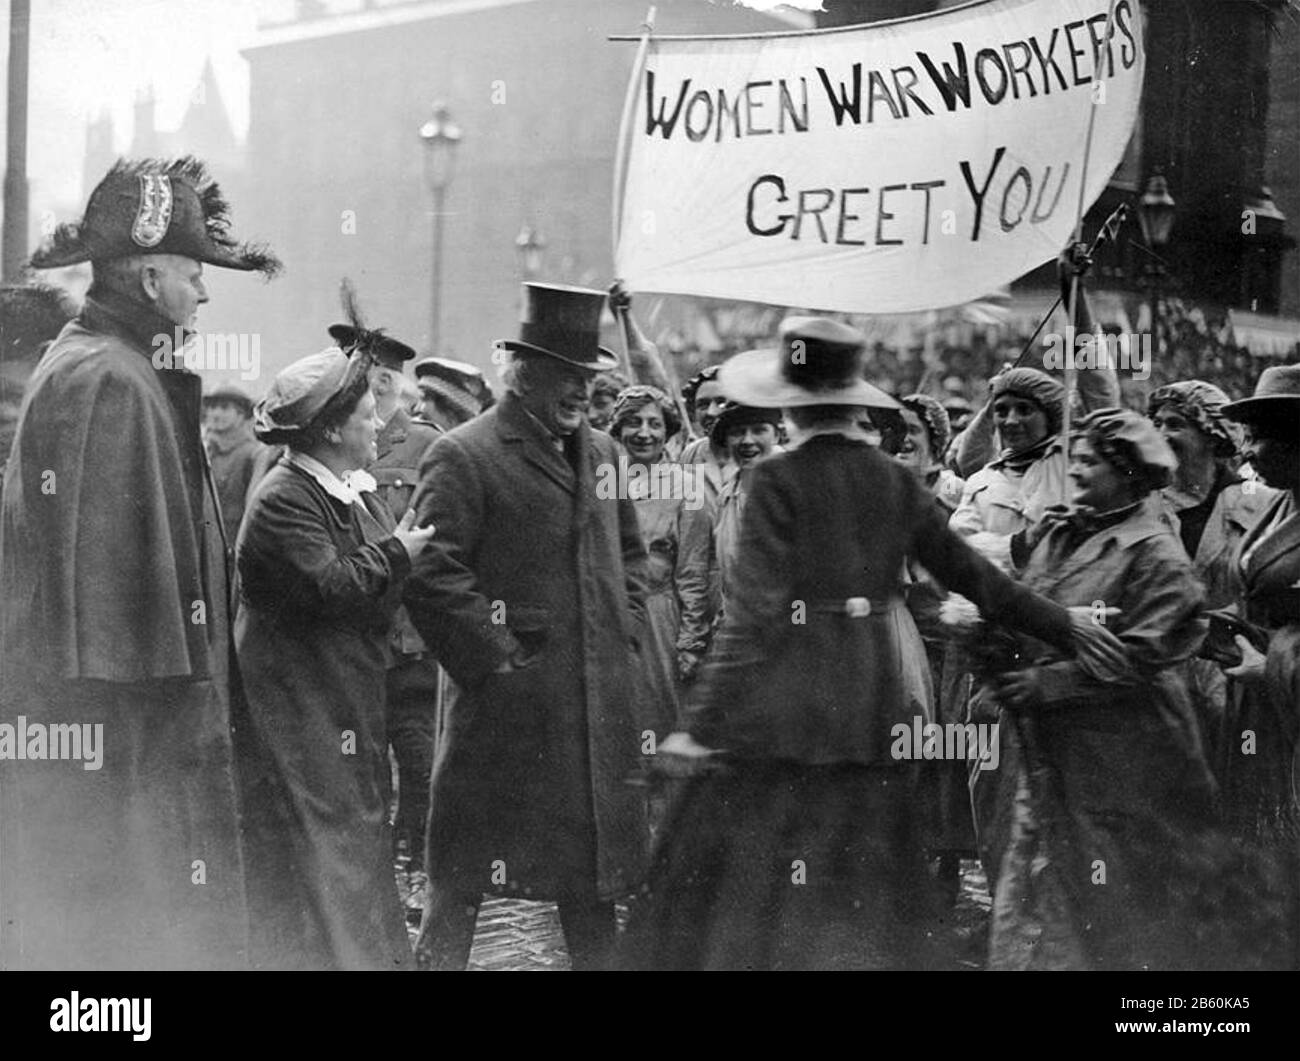 DAVID LLOYD GEORGE (1863-1945) as PM meeting women munitions workers in Manchester in September 1918. Leading suffragettes Flora Drummond at left and Phyllis Ayrton in wide brimmed hat make their case to the PM. Stock Photo